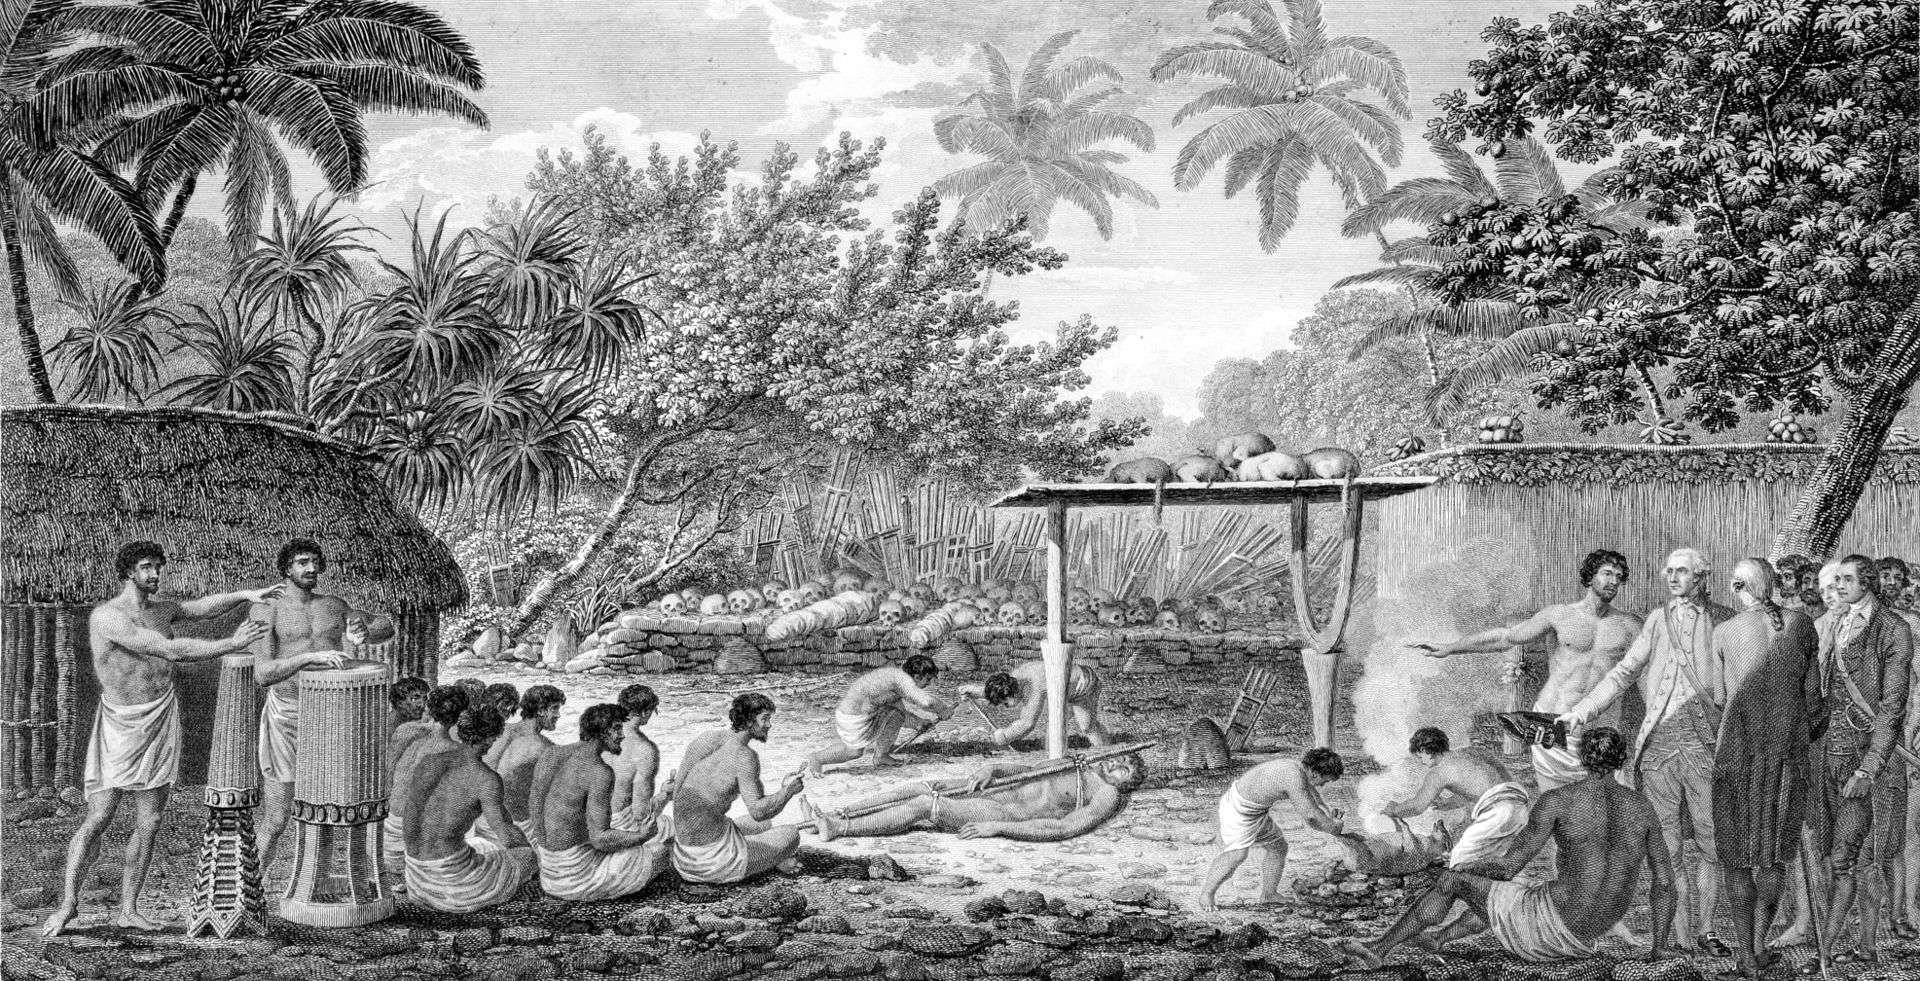 Illustration from the 1815 edition of Cook's Voyages, depicting Cook watching a human sacrifice in Tahiti c. 1773